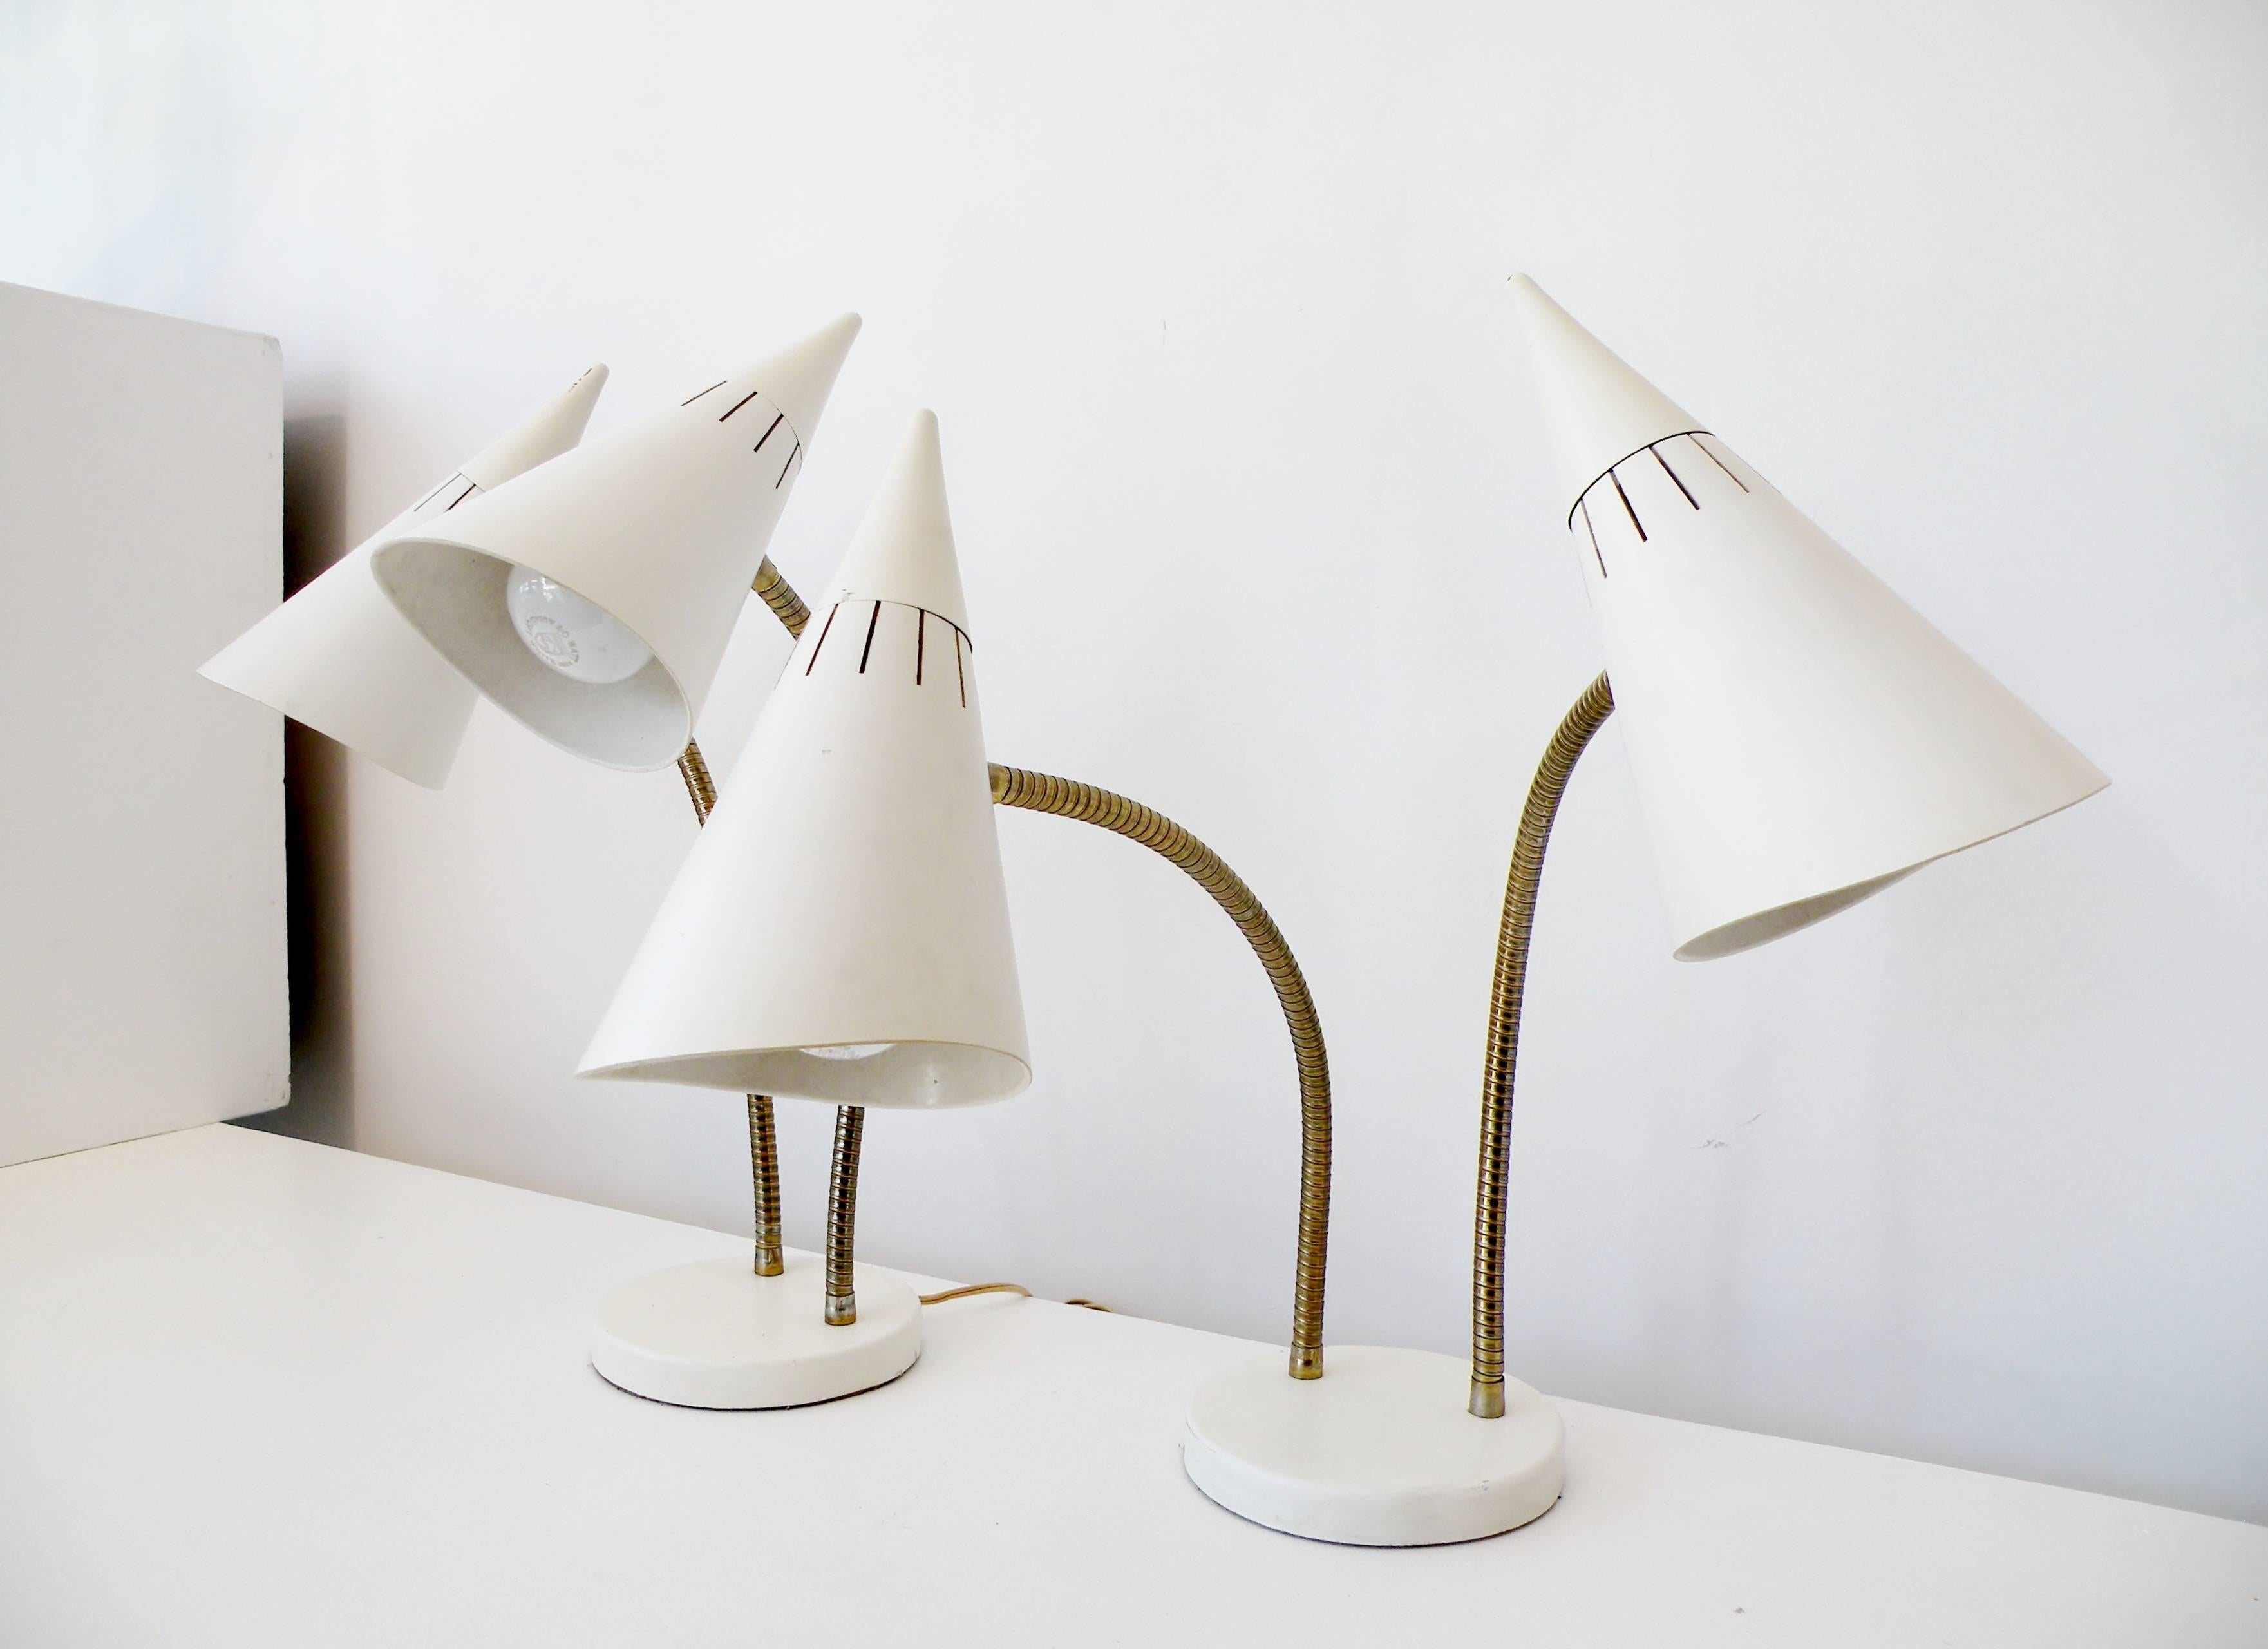 Iconic pair of double cone gooseneck mid-century lamps designed by Gerald Thurston for Lightolier for table, desk, bedside or task lighting. 

White surface finish, fiberglass cone shades and brass fittings. With 6